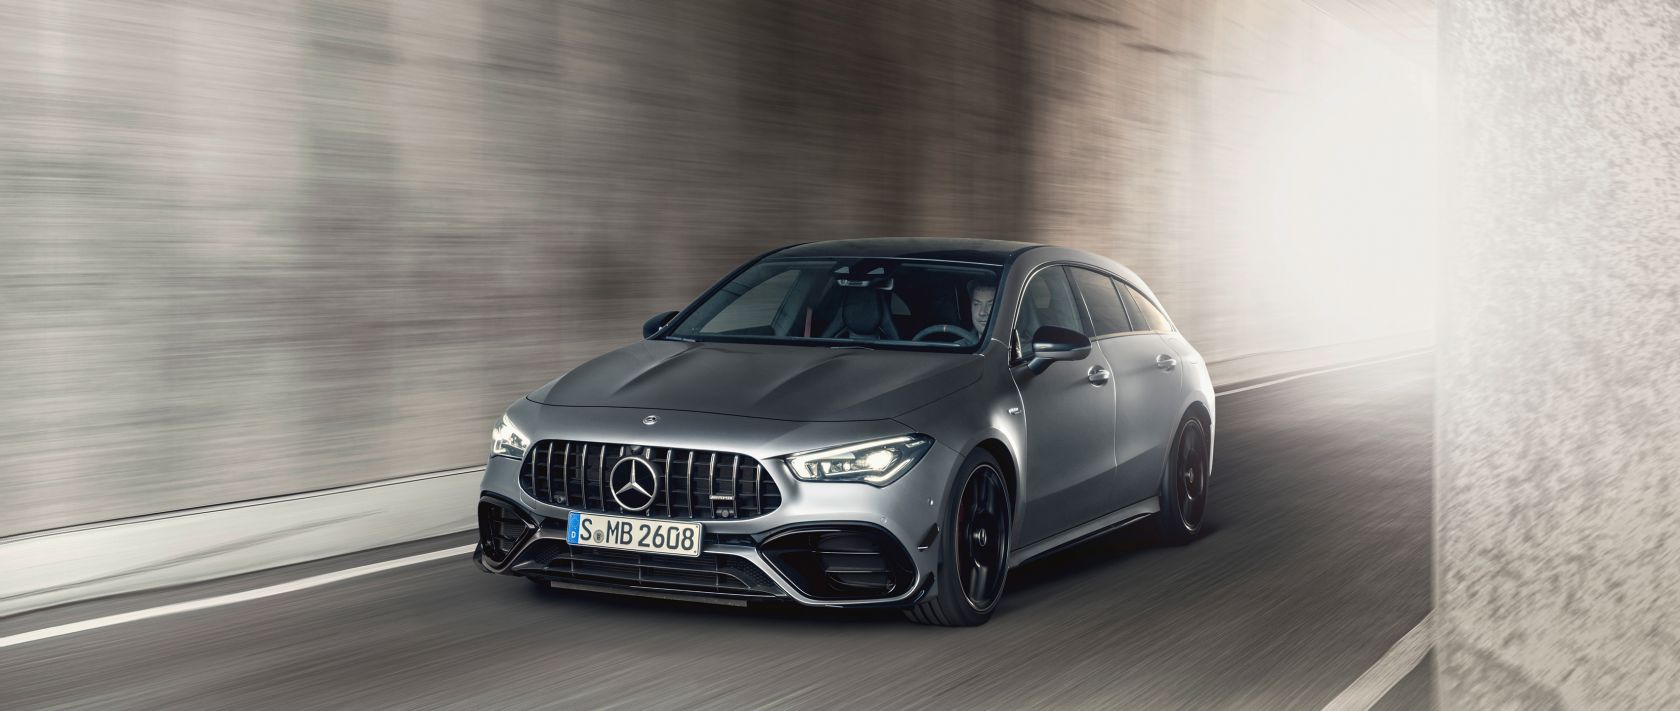 Meet The All New Mercedes Amg Cla 45 S 4matic Shooting Brake